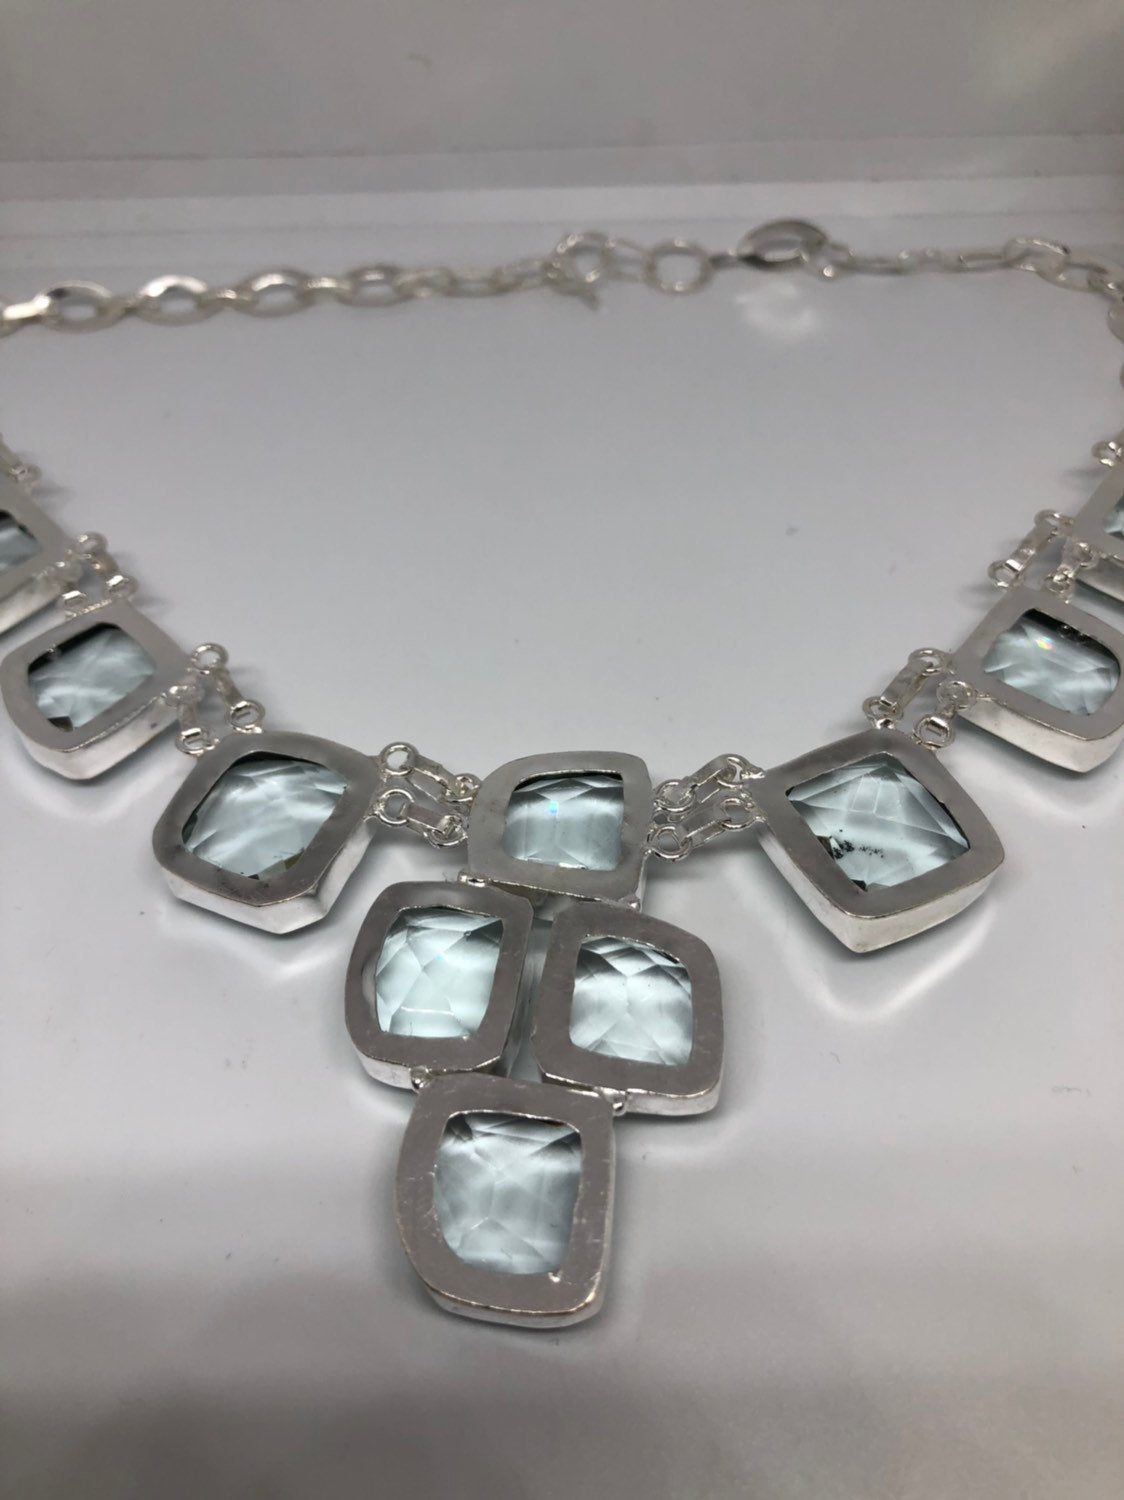 Aqua Blue Handmade Gothic Styled Silver Finished Genuine Facetted Antique Glass Turquoise Choker Necklace